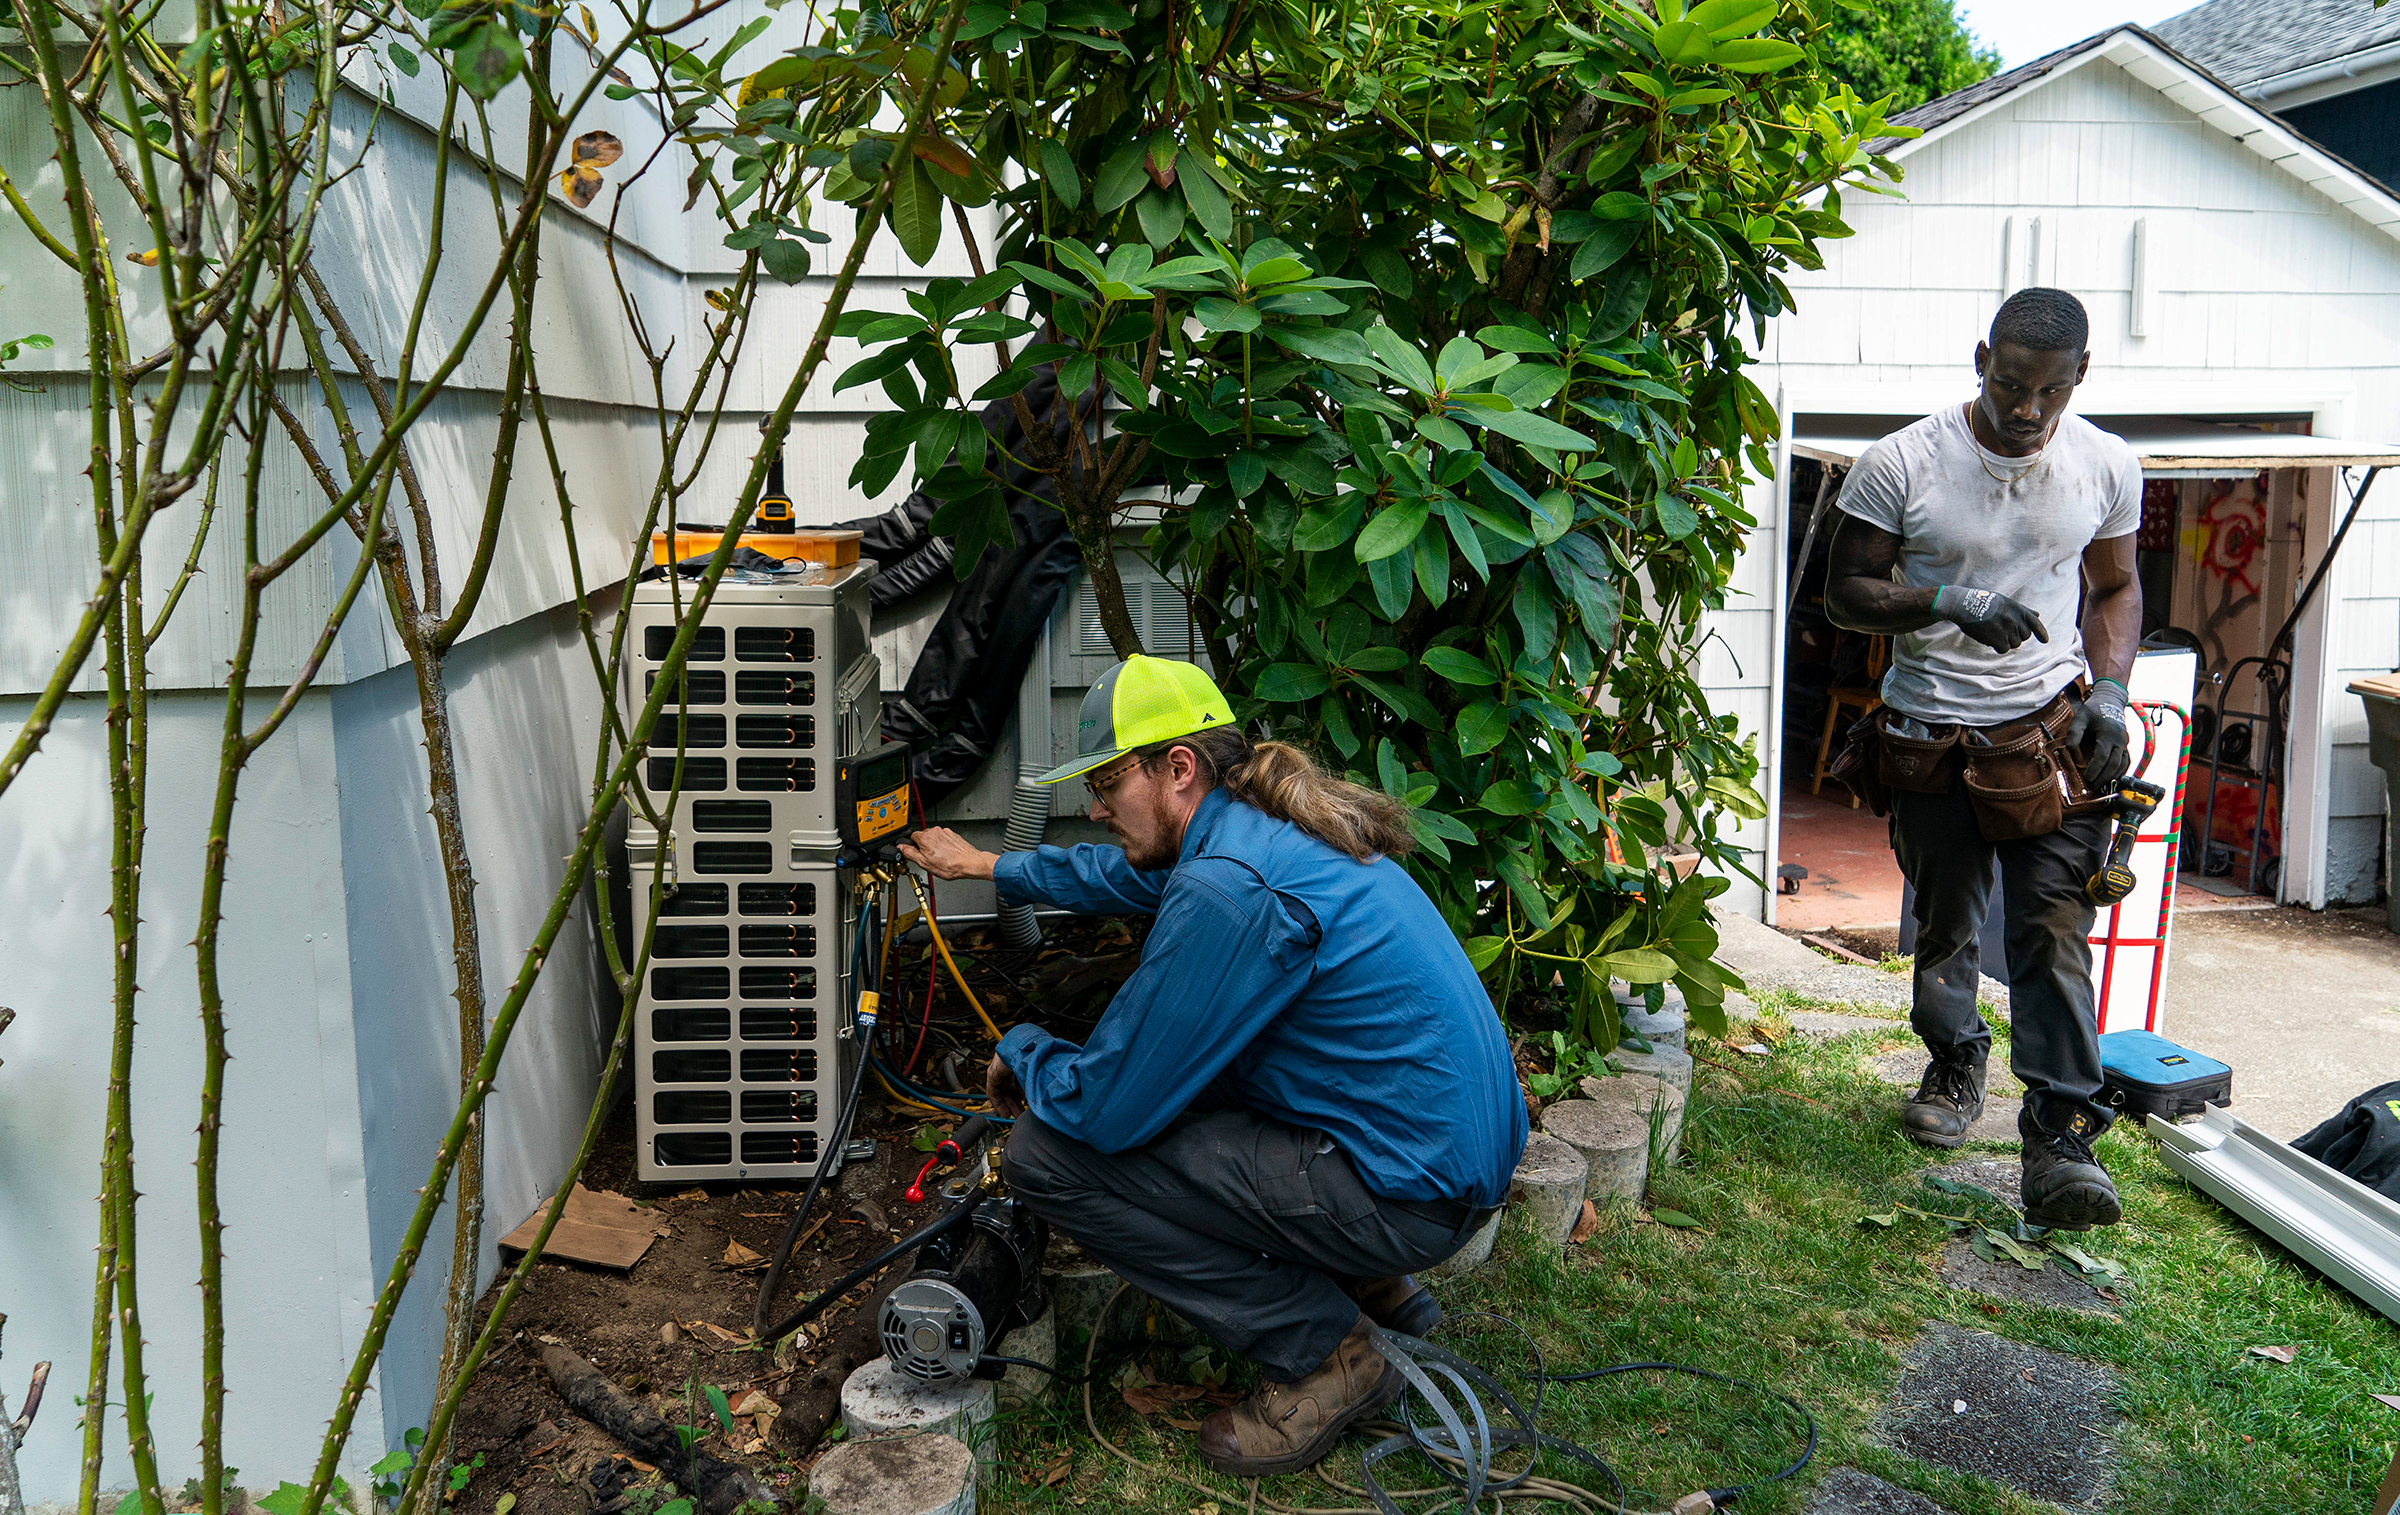 Luke Peters, left, and Elliott Thomas install a mini-split heating and air conditioning system at a home in Seattle on June 23, 2021. A heat wave soon set records across the region. (Ruth Fremson—The New York Times/Redux)